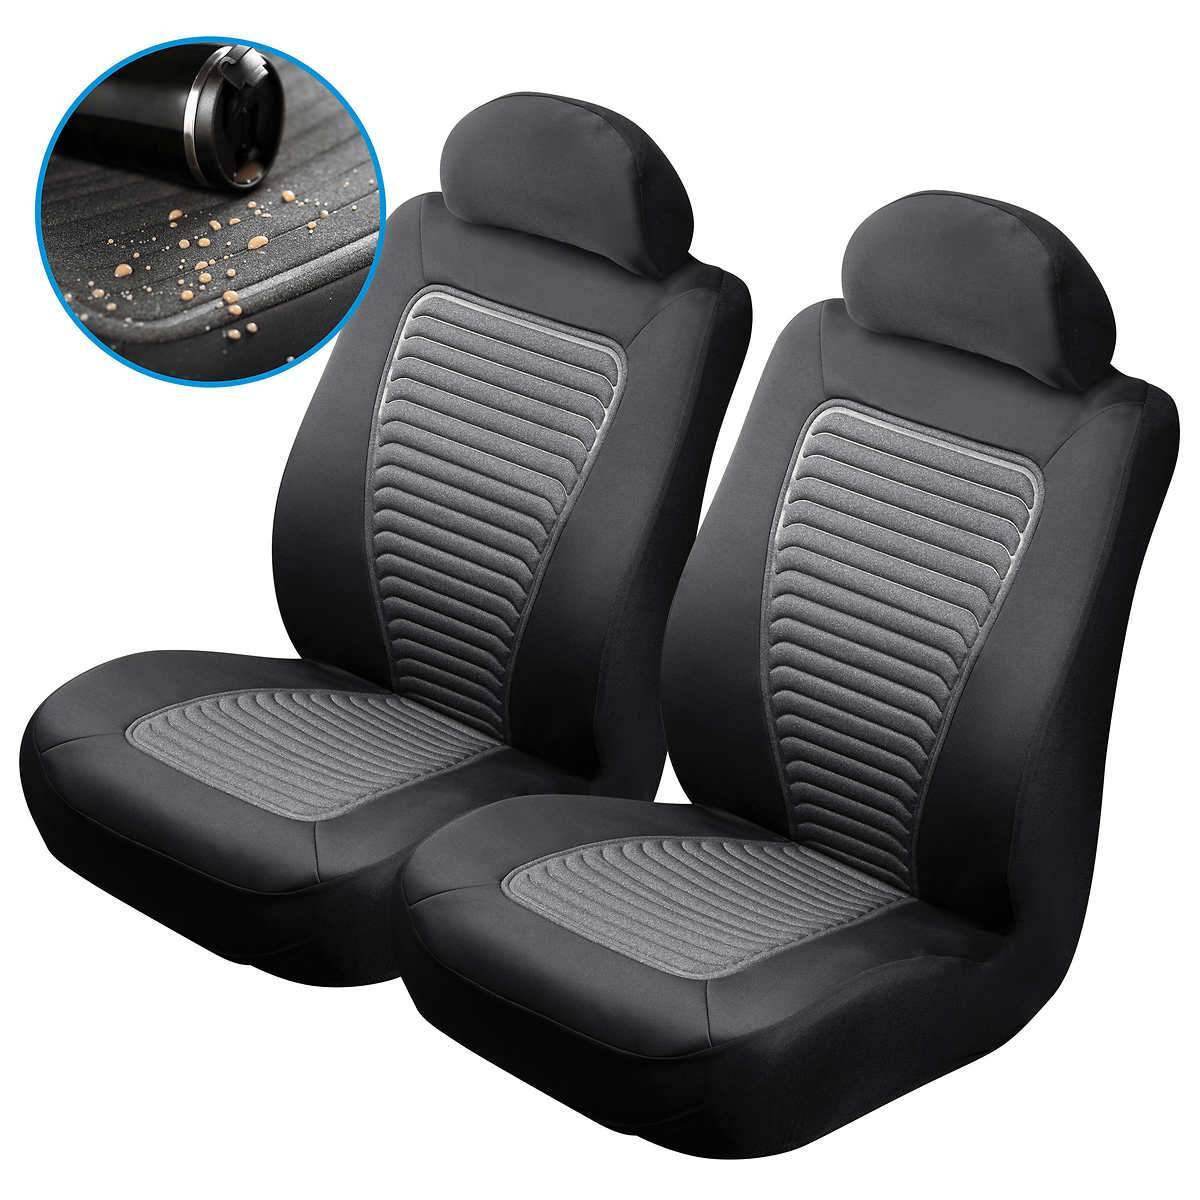 4 Top-notch Advantages of Implementing and Installing the Neoprene Seat Covers